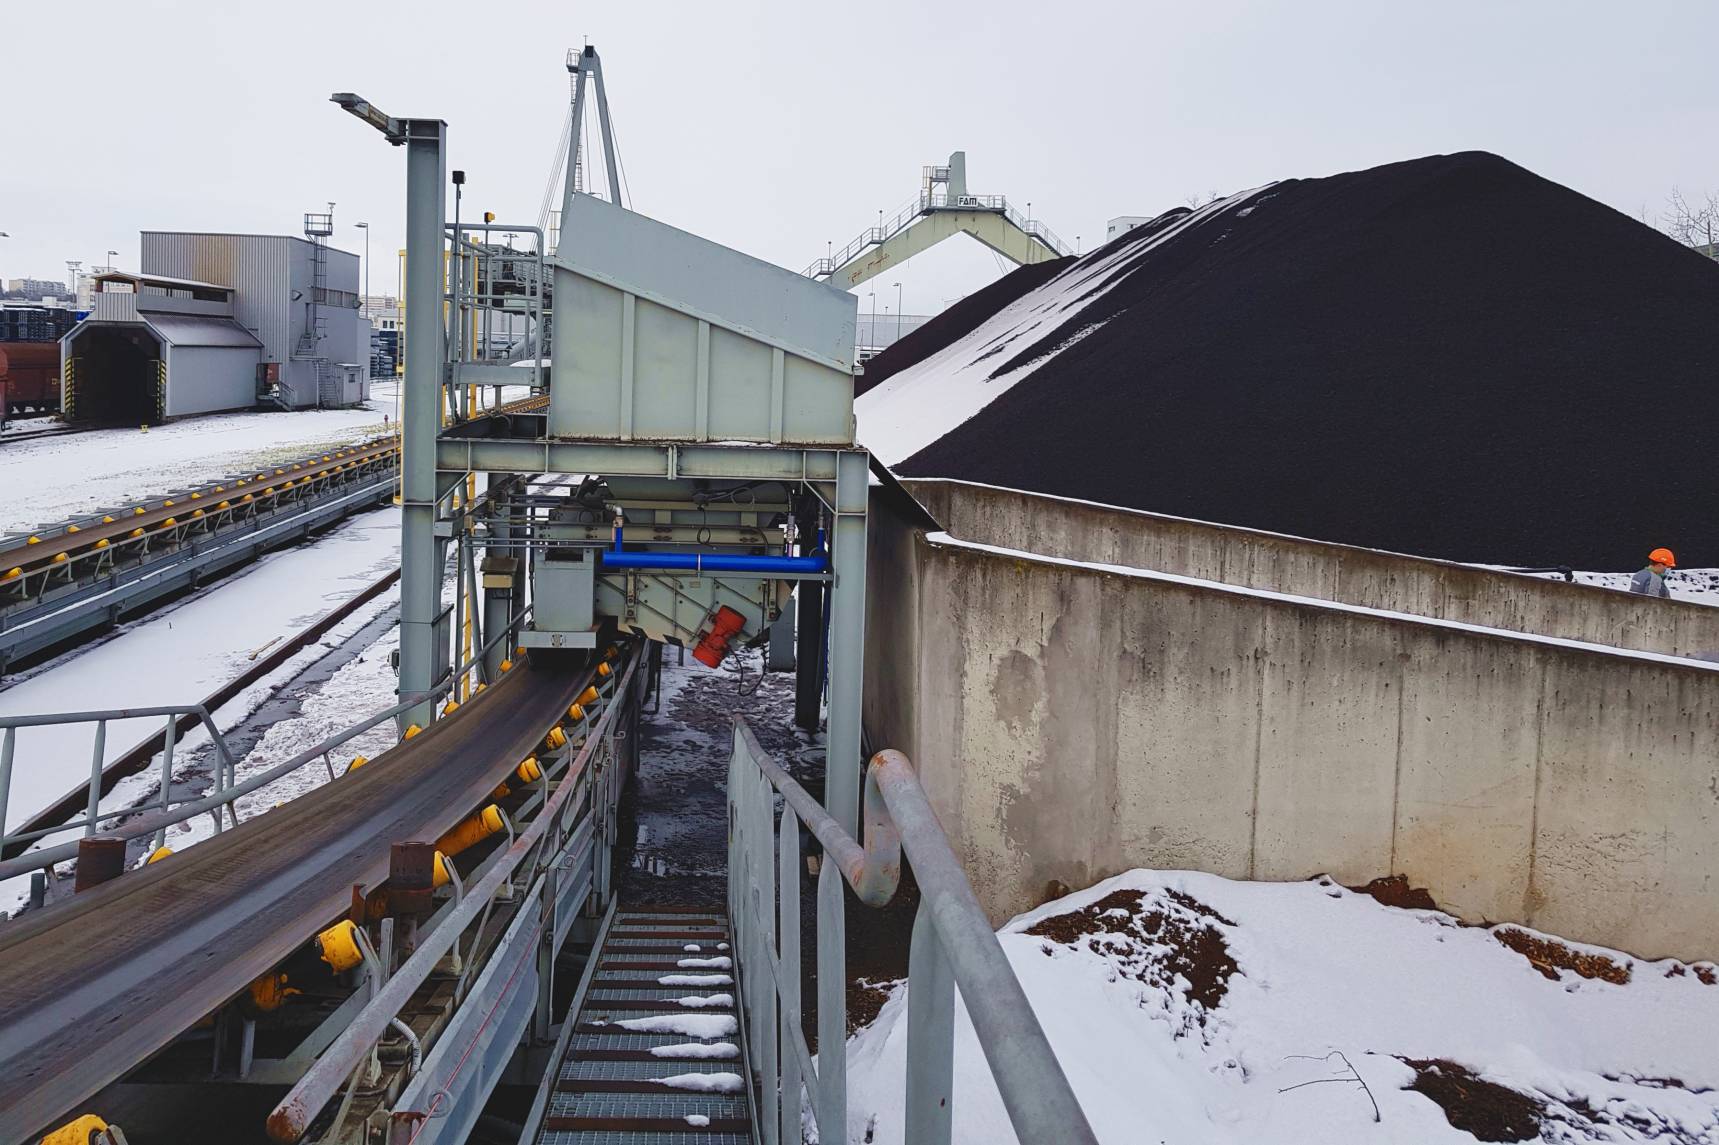 Project Documentation for the Sorting and Shredding of Biomass in the ŠKO-ENERGO Facility